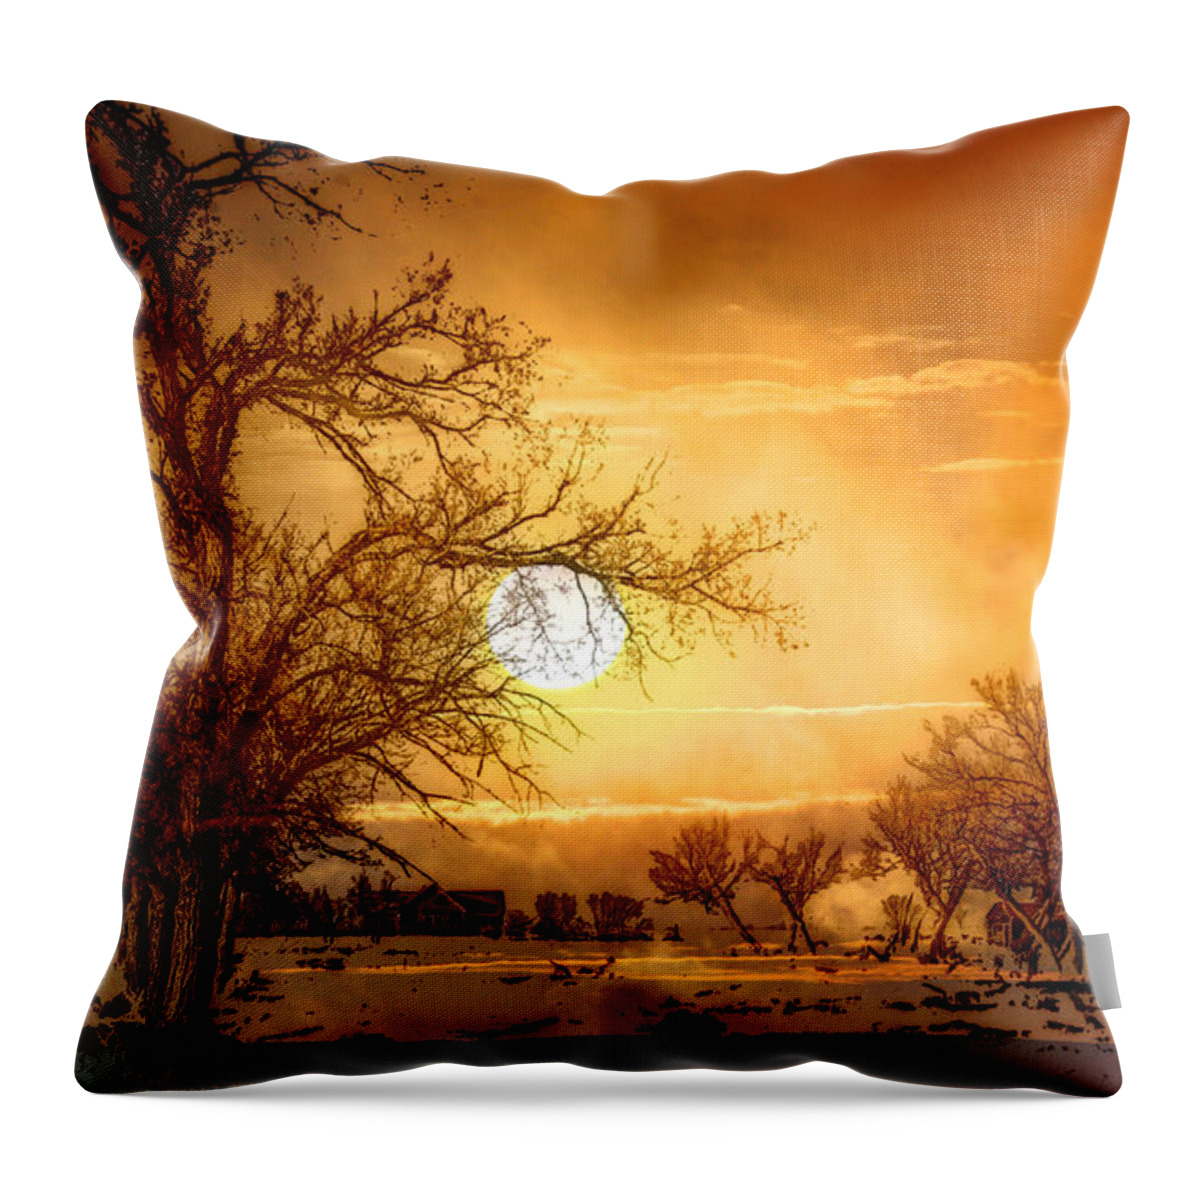 Andrea Lawrence Saskatchewan Artist Throw Pillow featuring the digital art Abandoned Farm by Andrea Lawrence